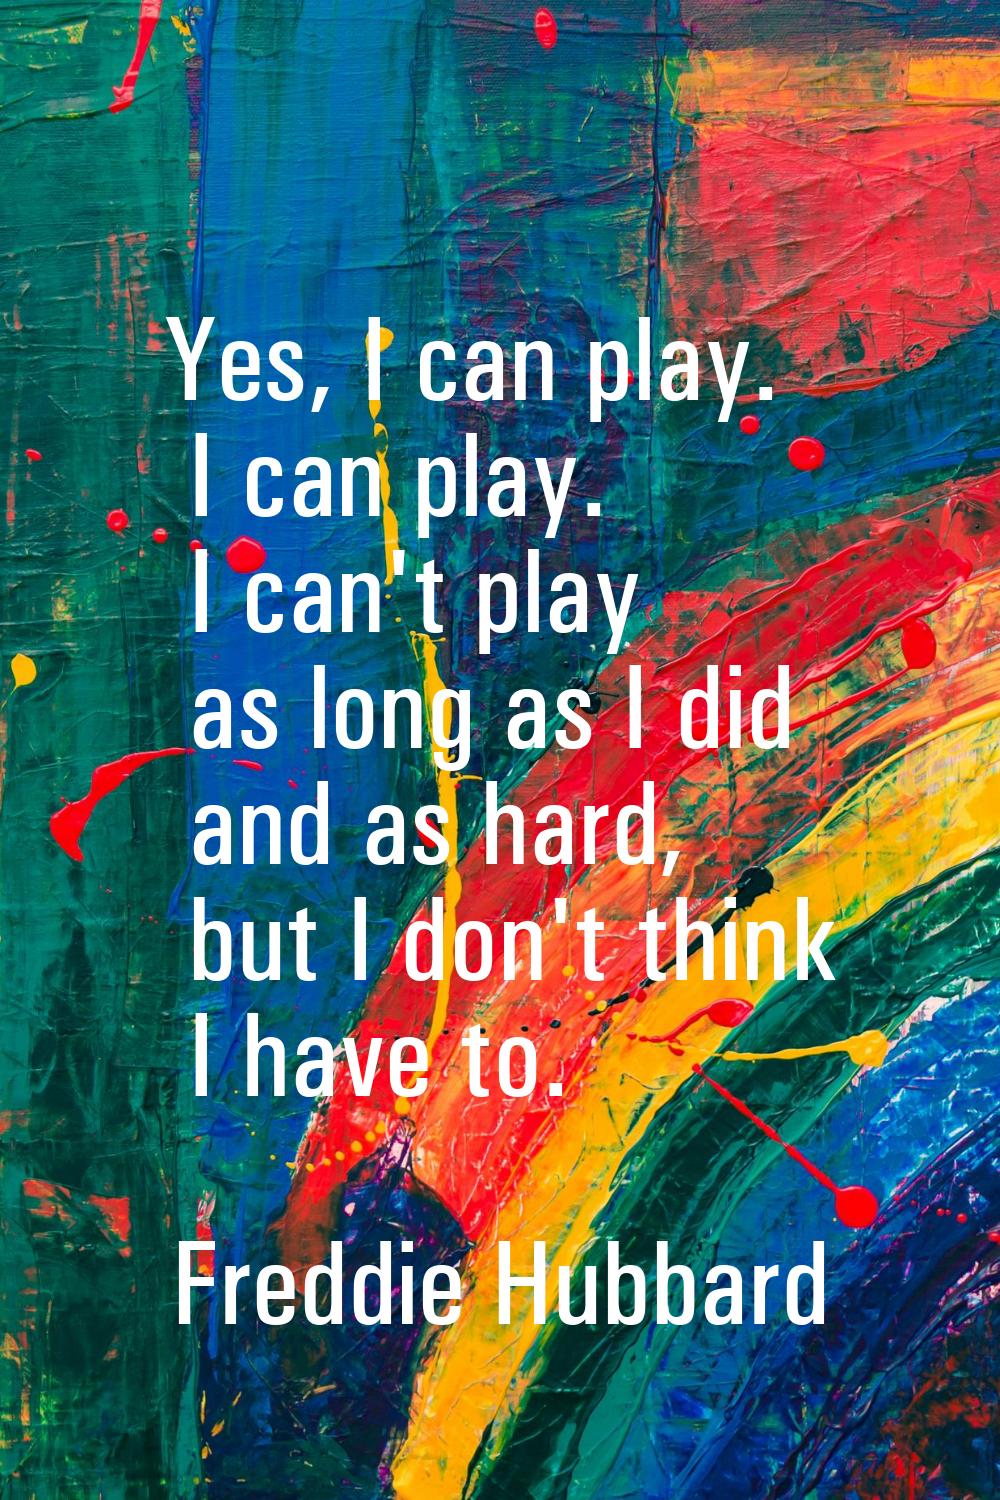 Yes, I can play. I can play. I can't play as long as I did and as hard, but I don't think I have to